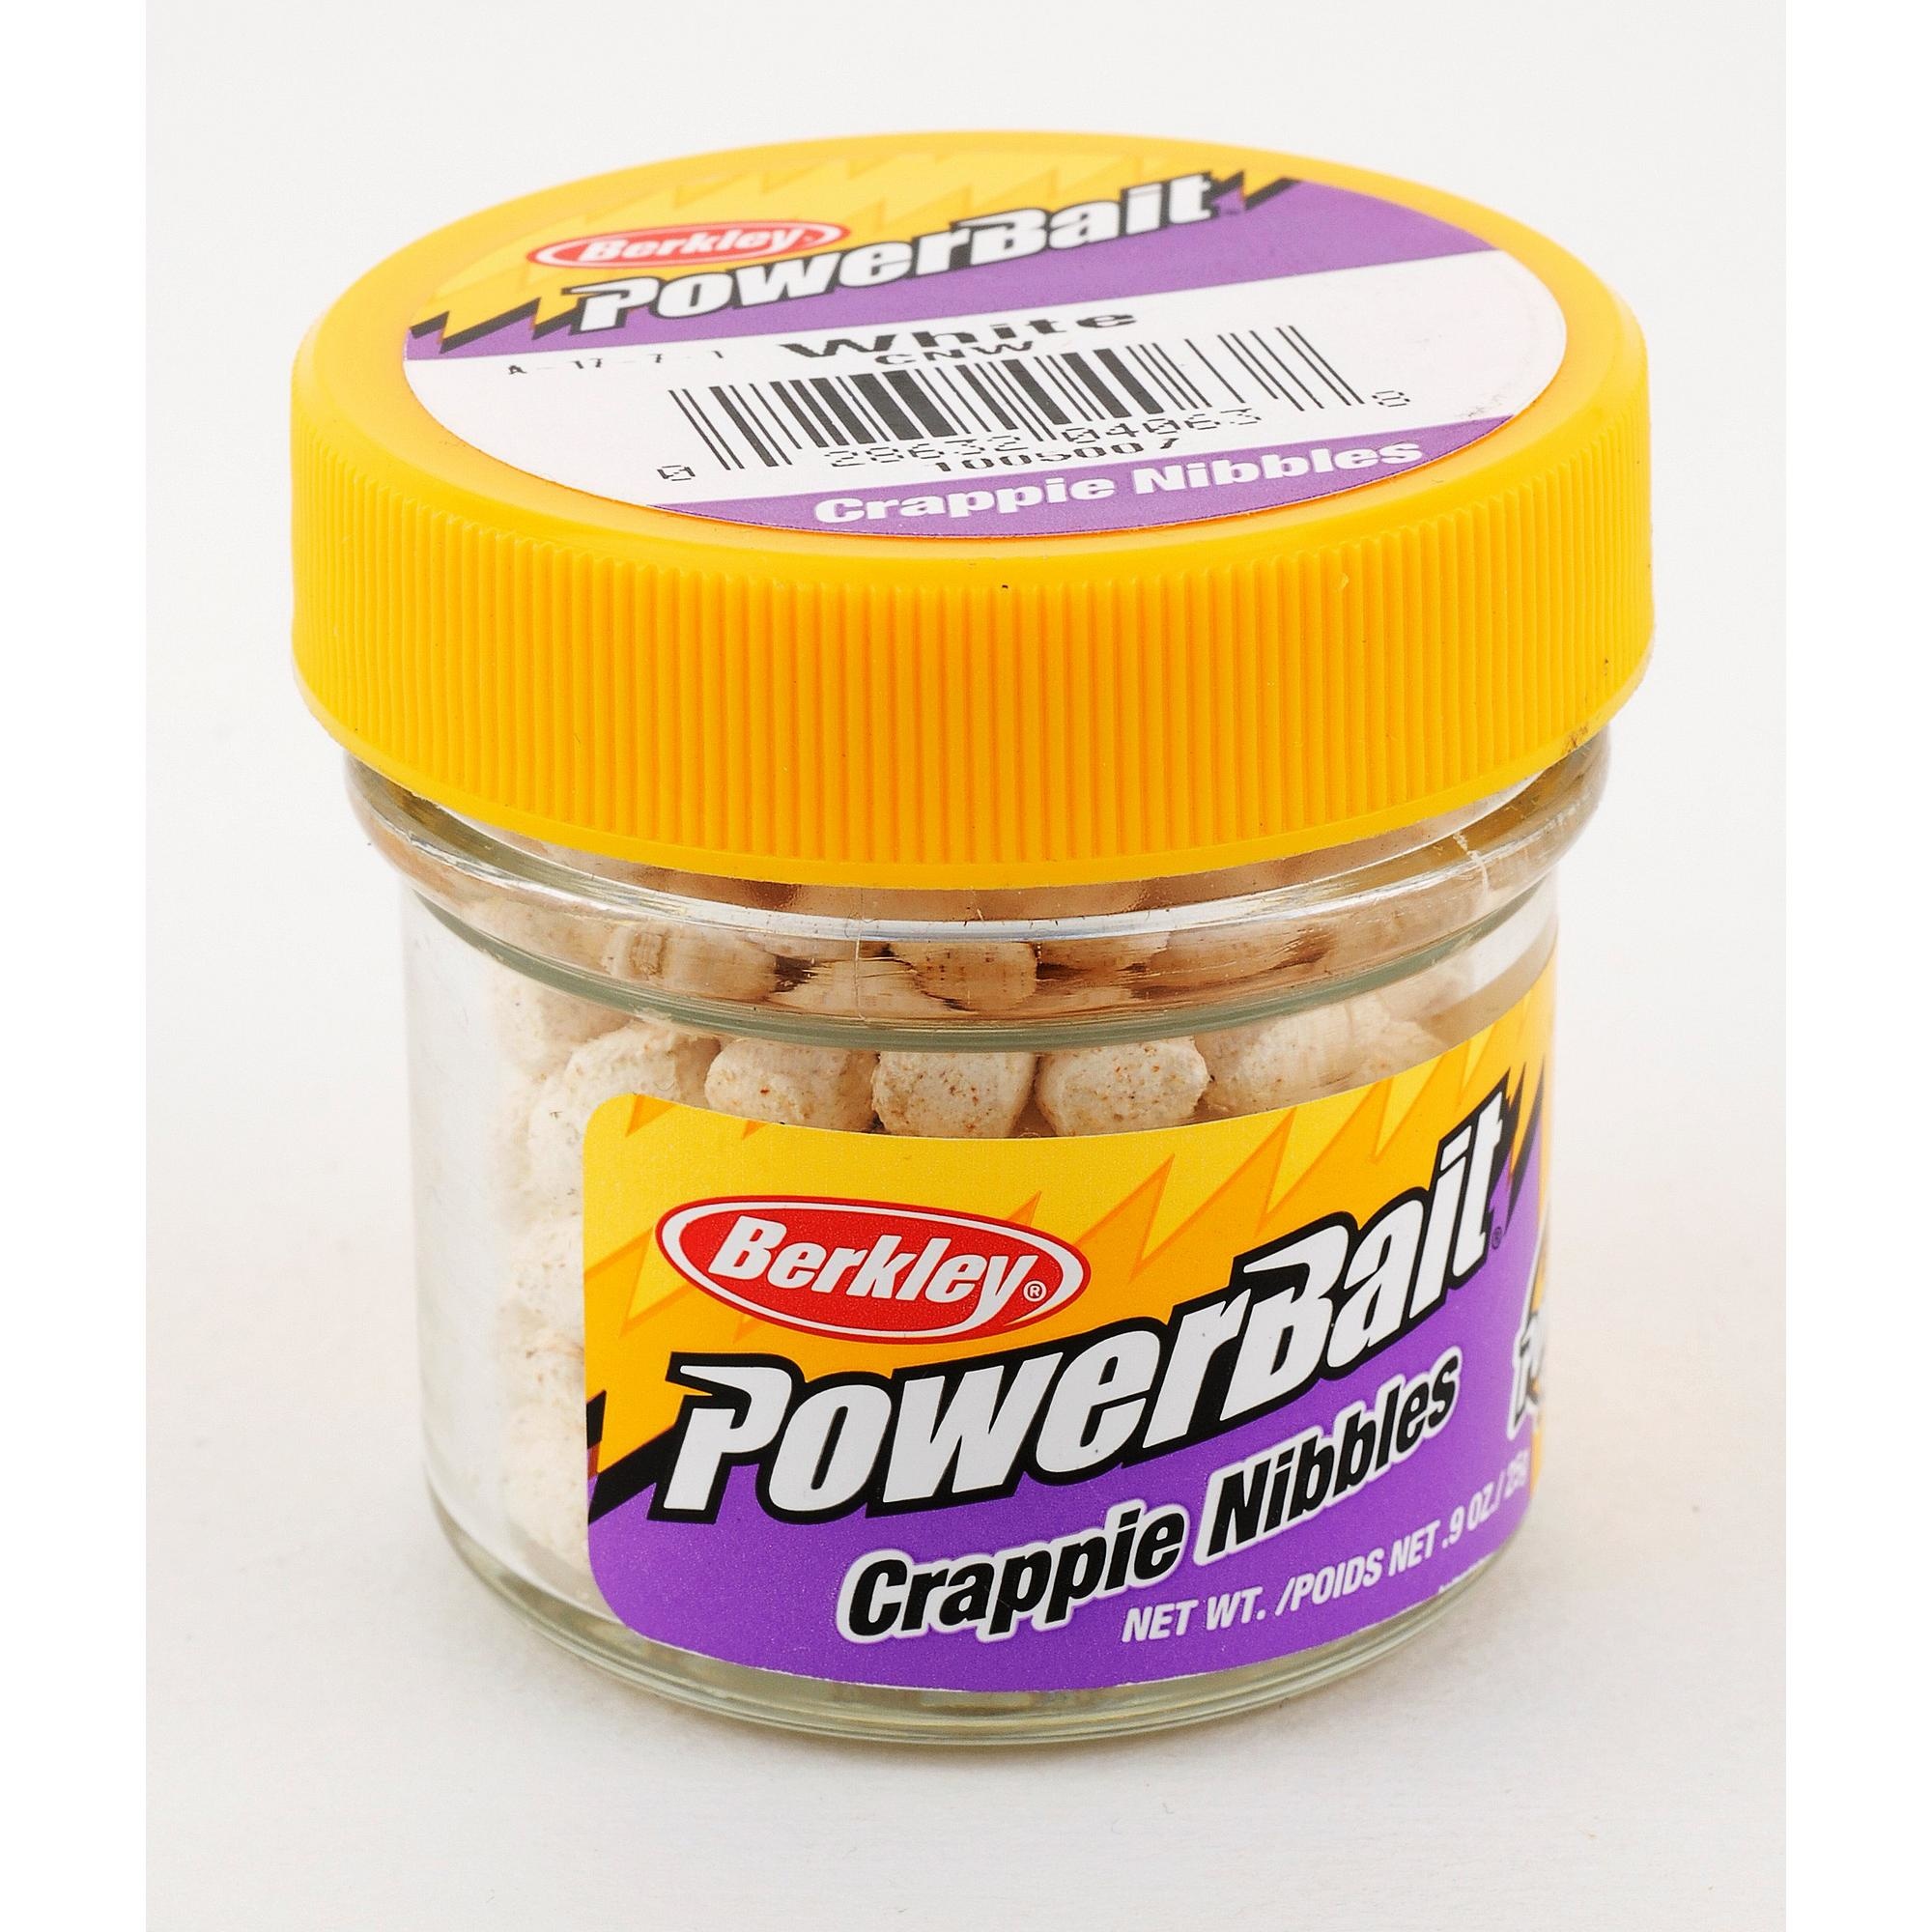 Crappie Nibbles White jar